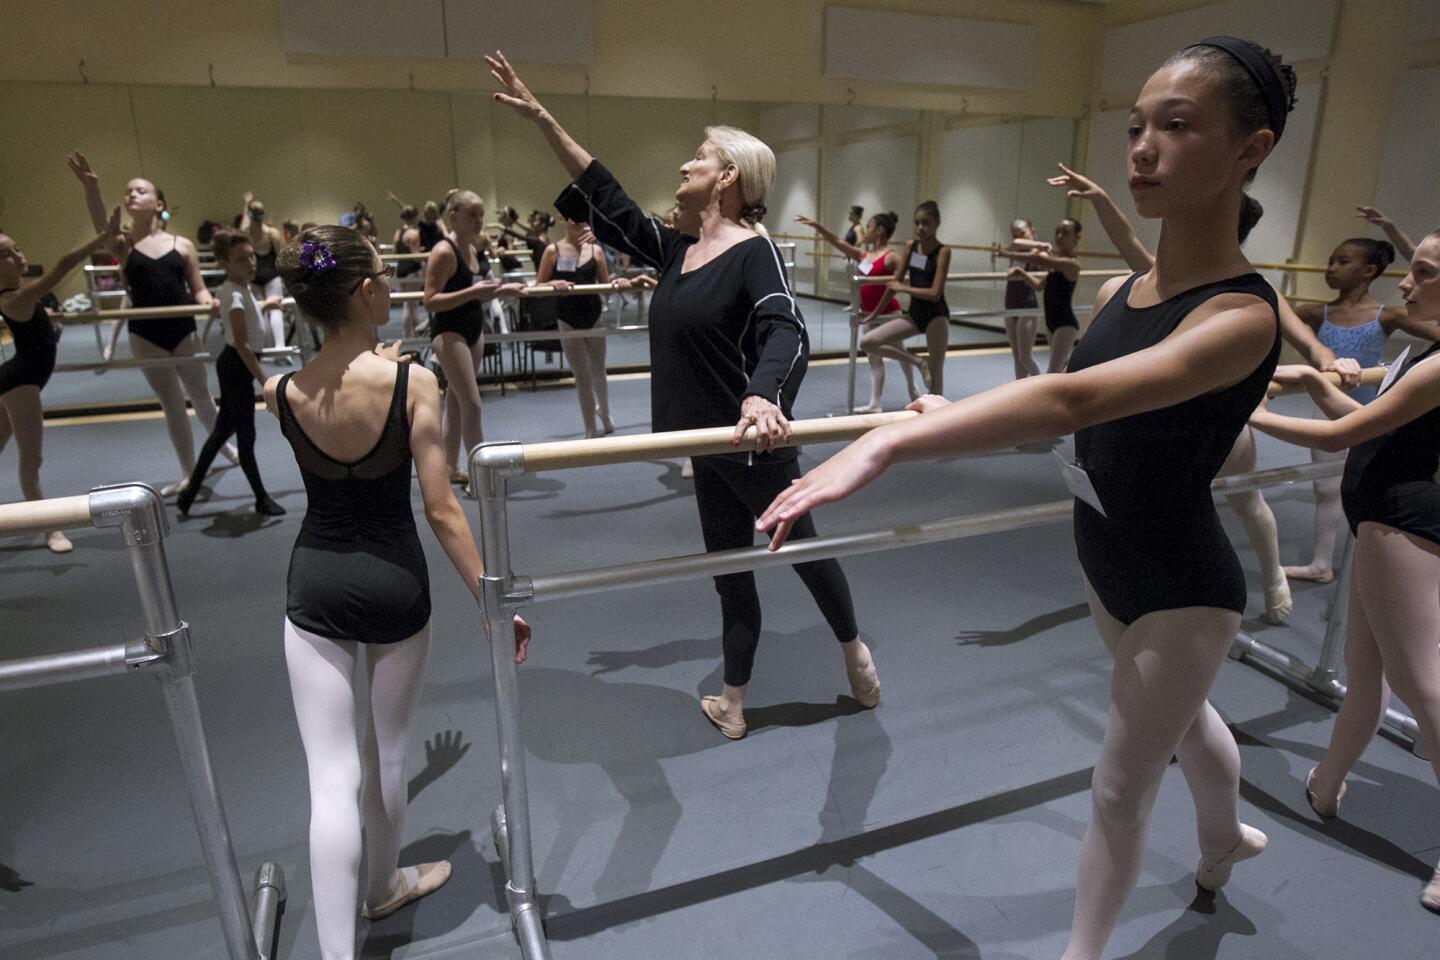 Alaine Haubert gives instructions to students during the Young Dancer Summer Workshops on Thursday, July 9. Haubert is the principal of the American Ballet Theatre William J. Gillespie School at Segerstrom Center for the Arts which will open the dance school officially in September.